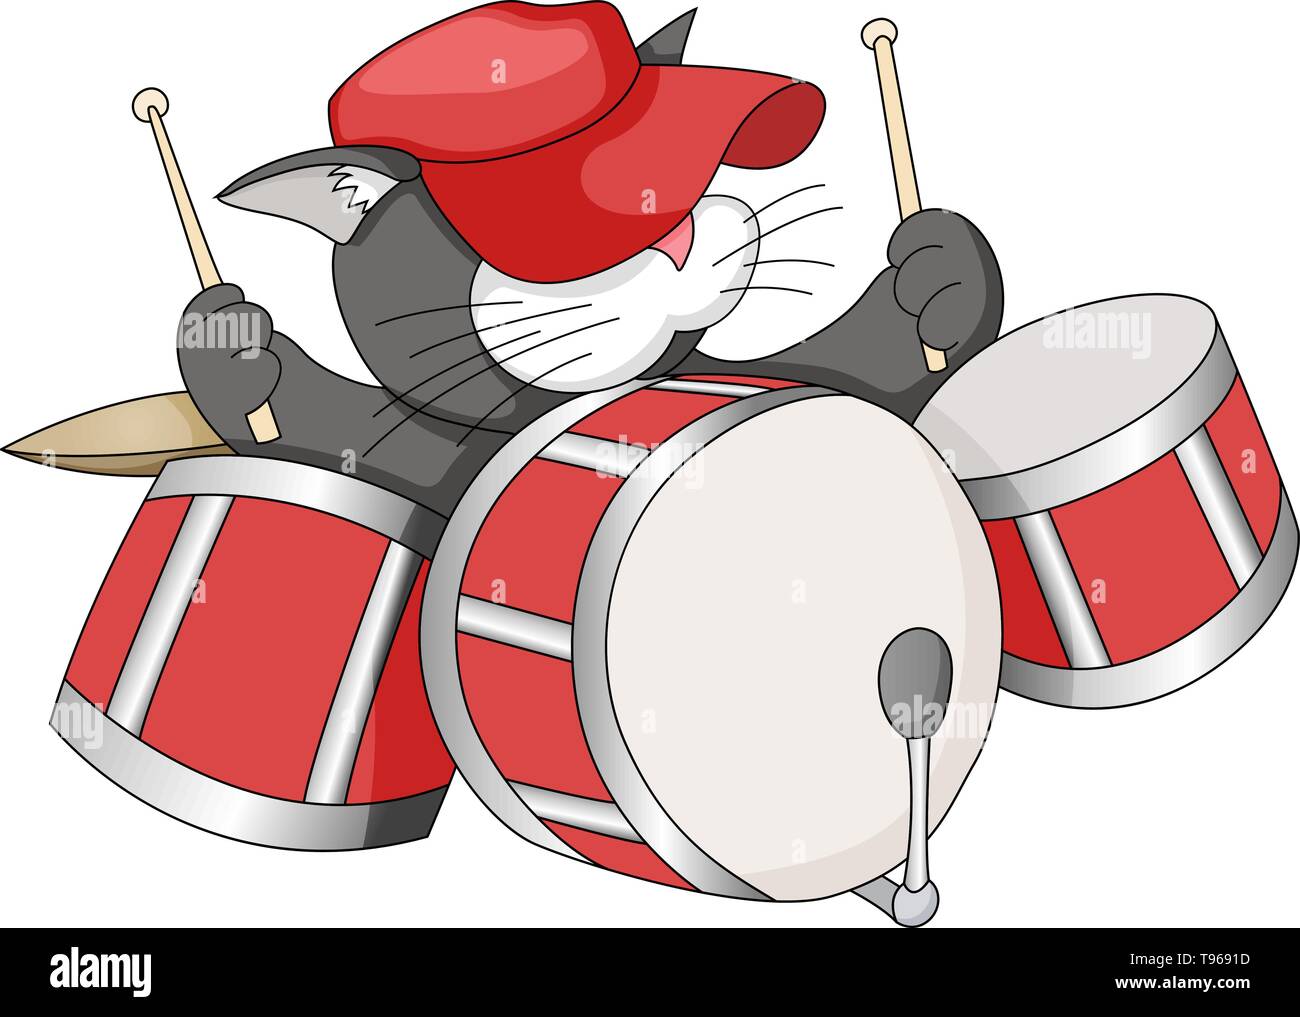 Rock and roll cat cartoon vector illustration for print design isolated on white Stock Vector